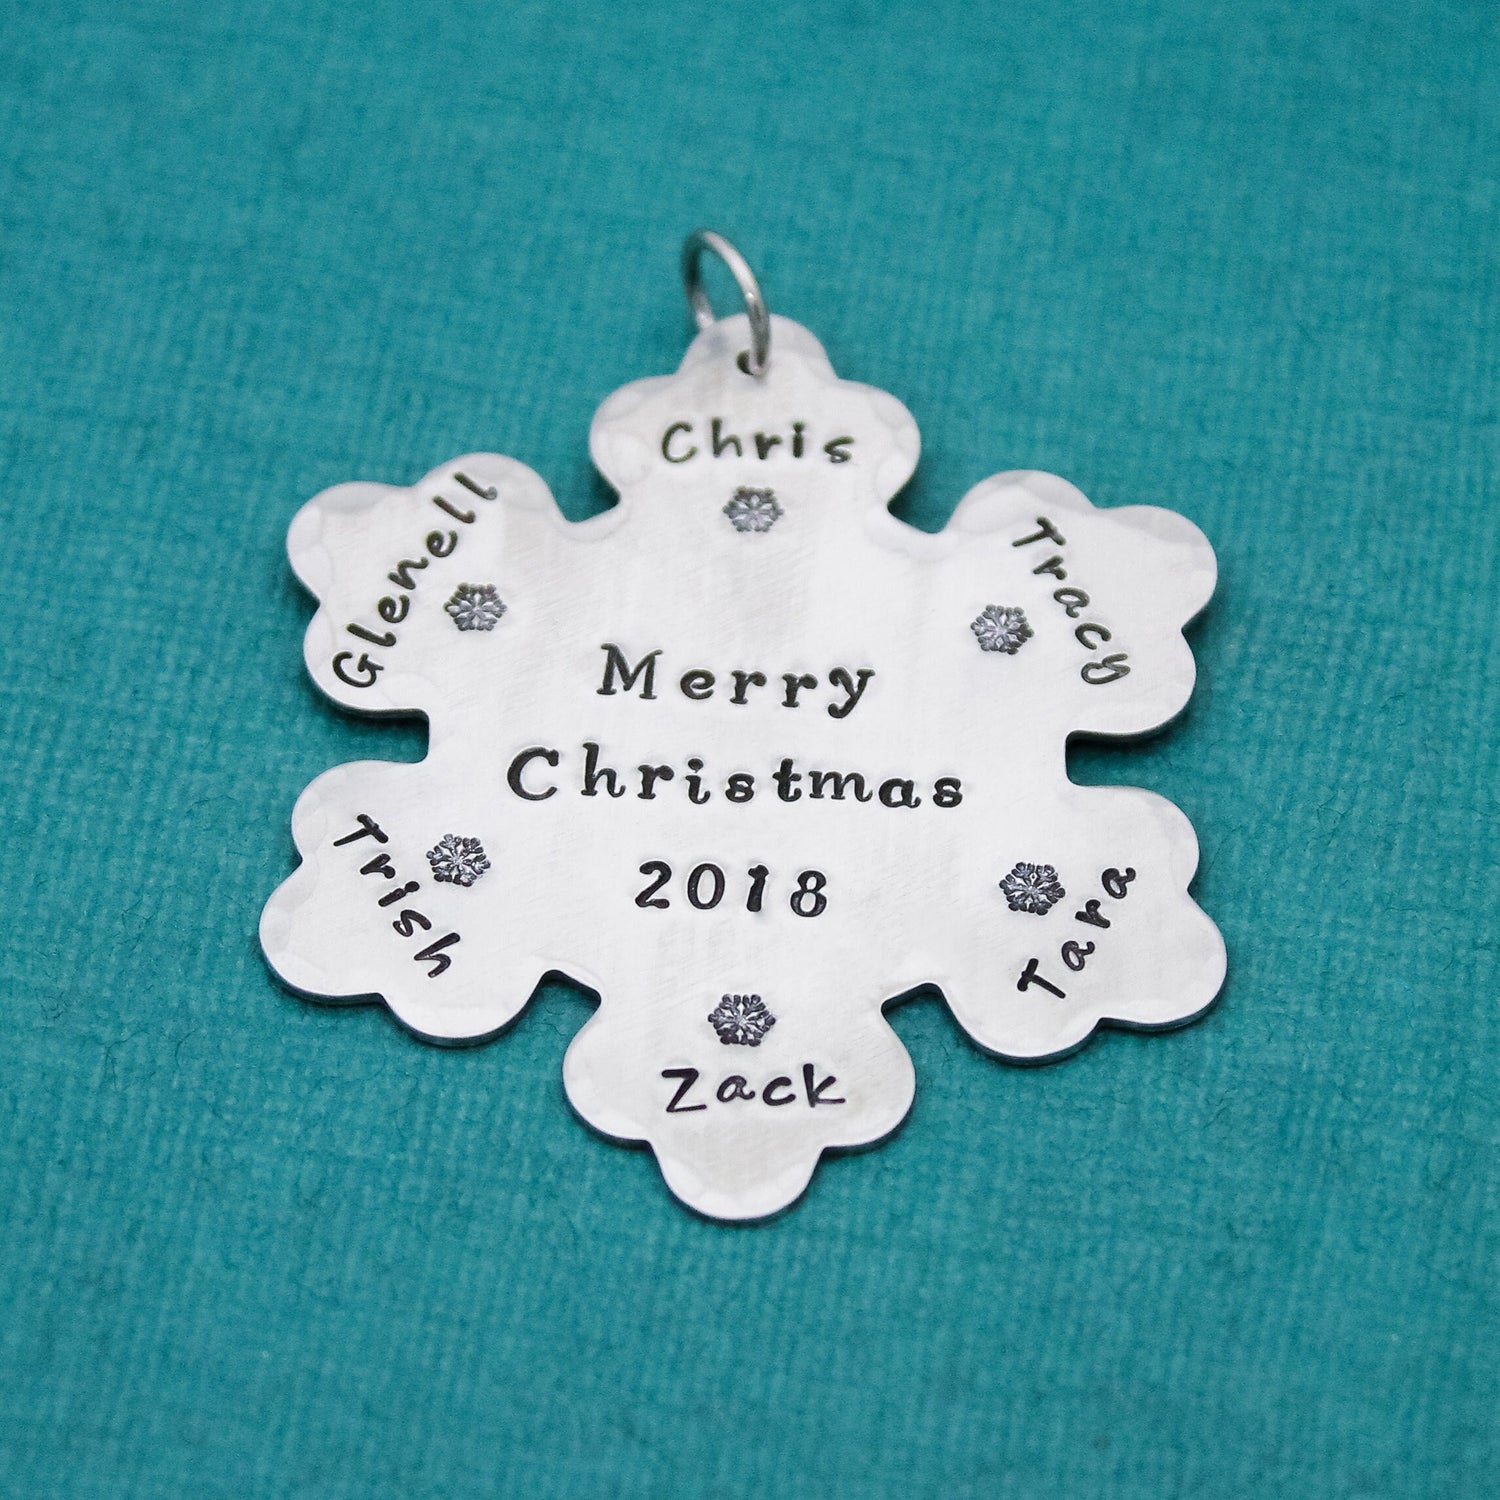 Snowflake Christmas Ornament, Personalized Family Christmas Ornament, Custom Ornament, Merry Christmas Ornament, Hand Stamped in Aluminum